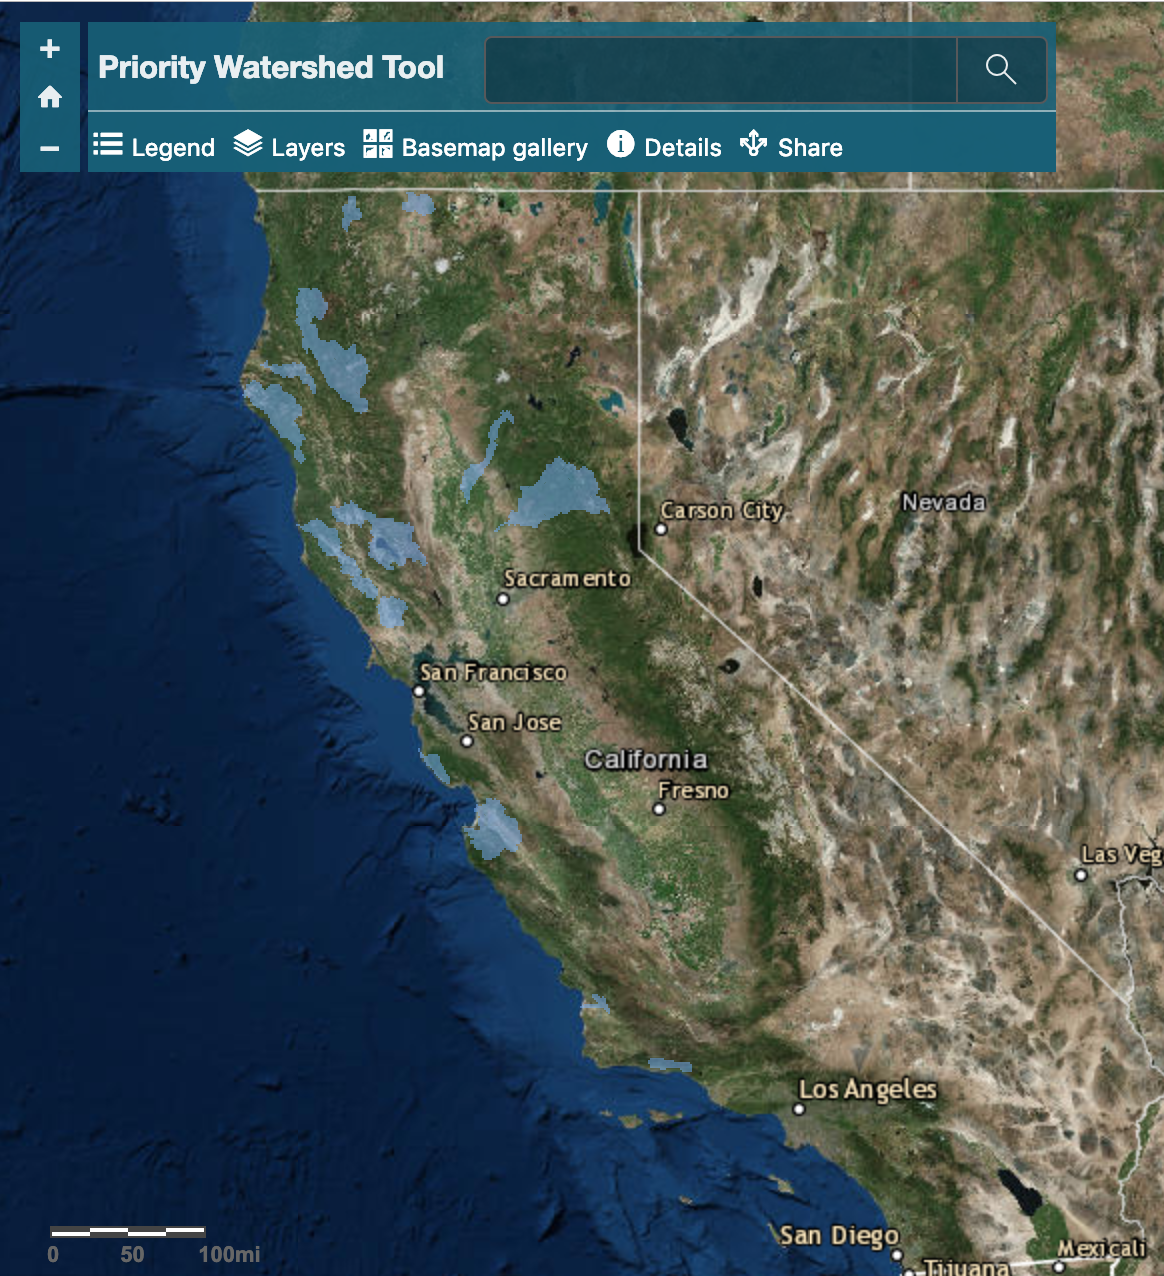 California State Water Board Priority Watershed Map for Cannabis Cultivation